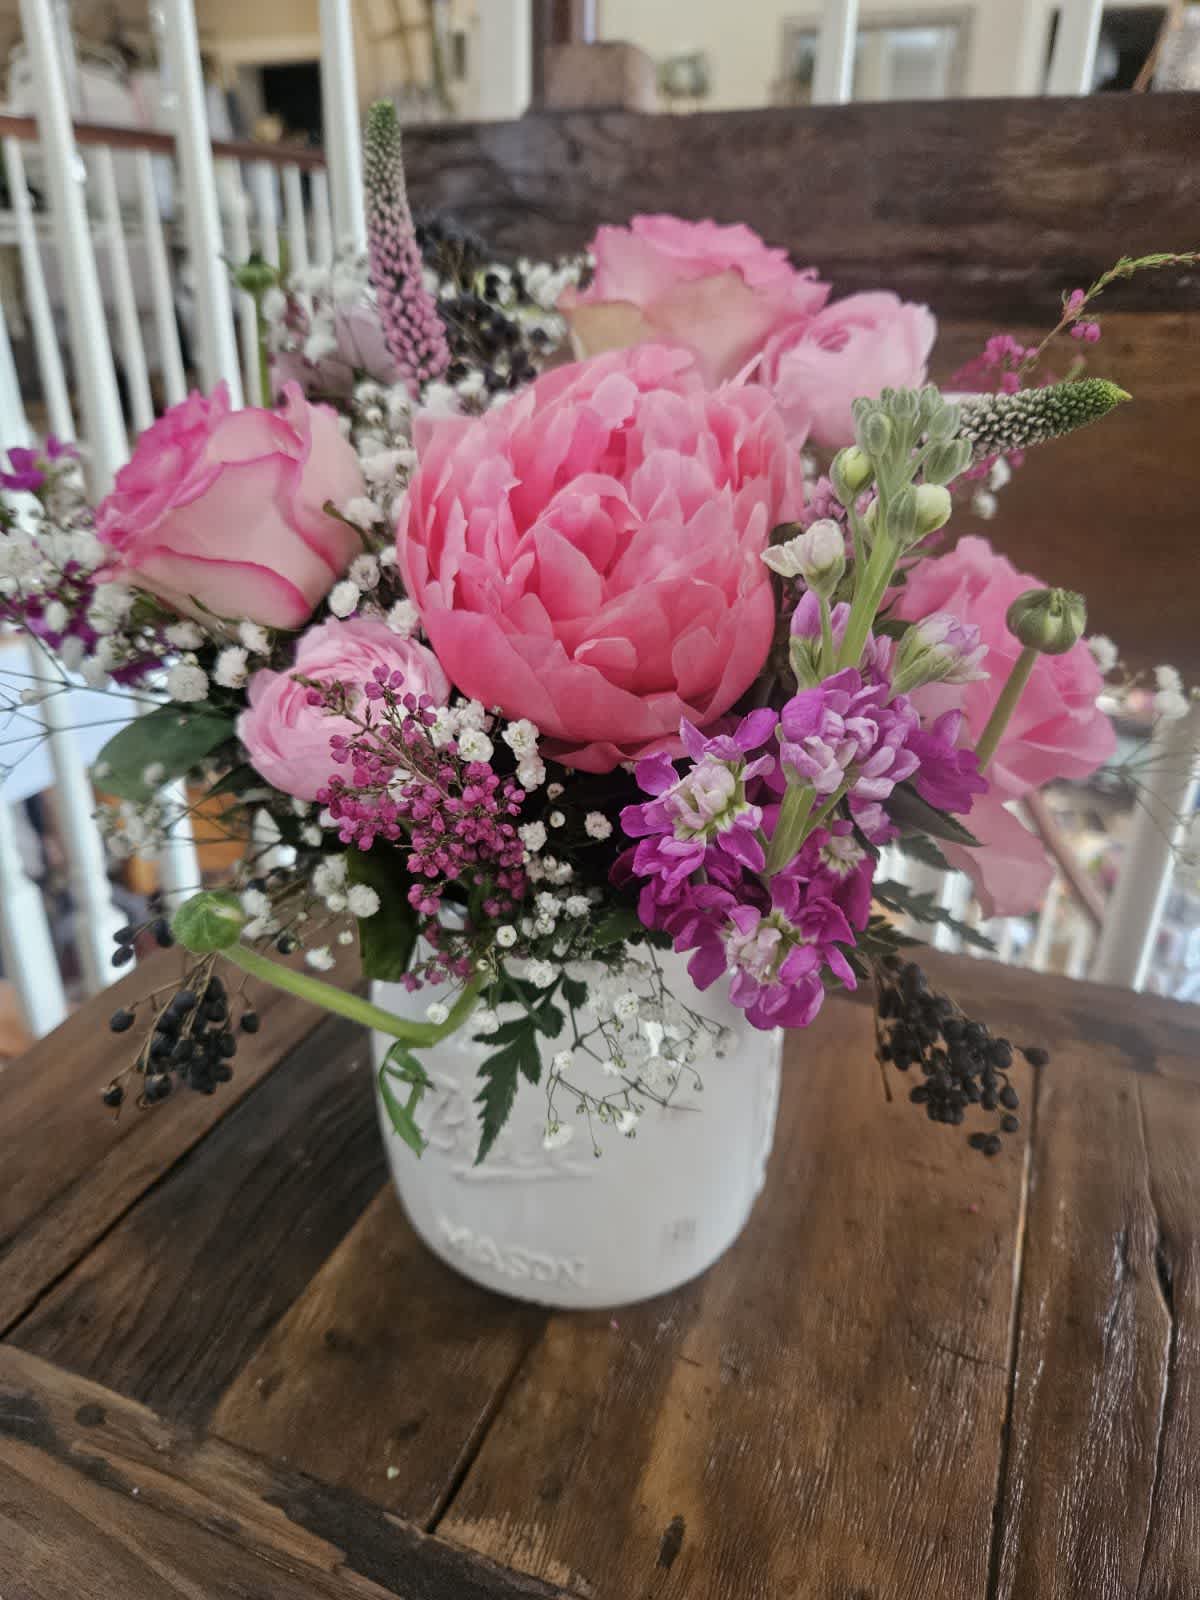  Mom's Pretty In Pink Bouquet - Pink Peonies with oink roses, pink ranunculus, stock and heather arranged in an antique mason jar